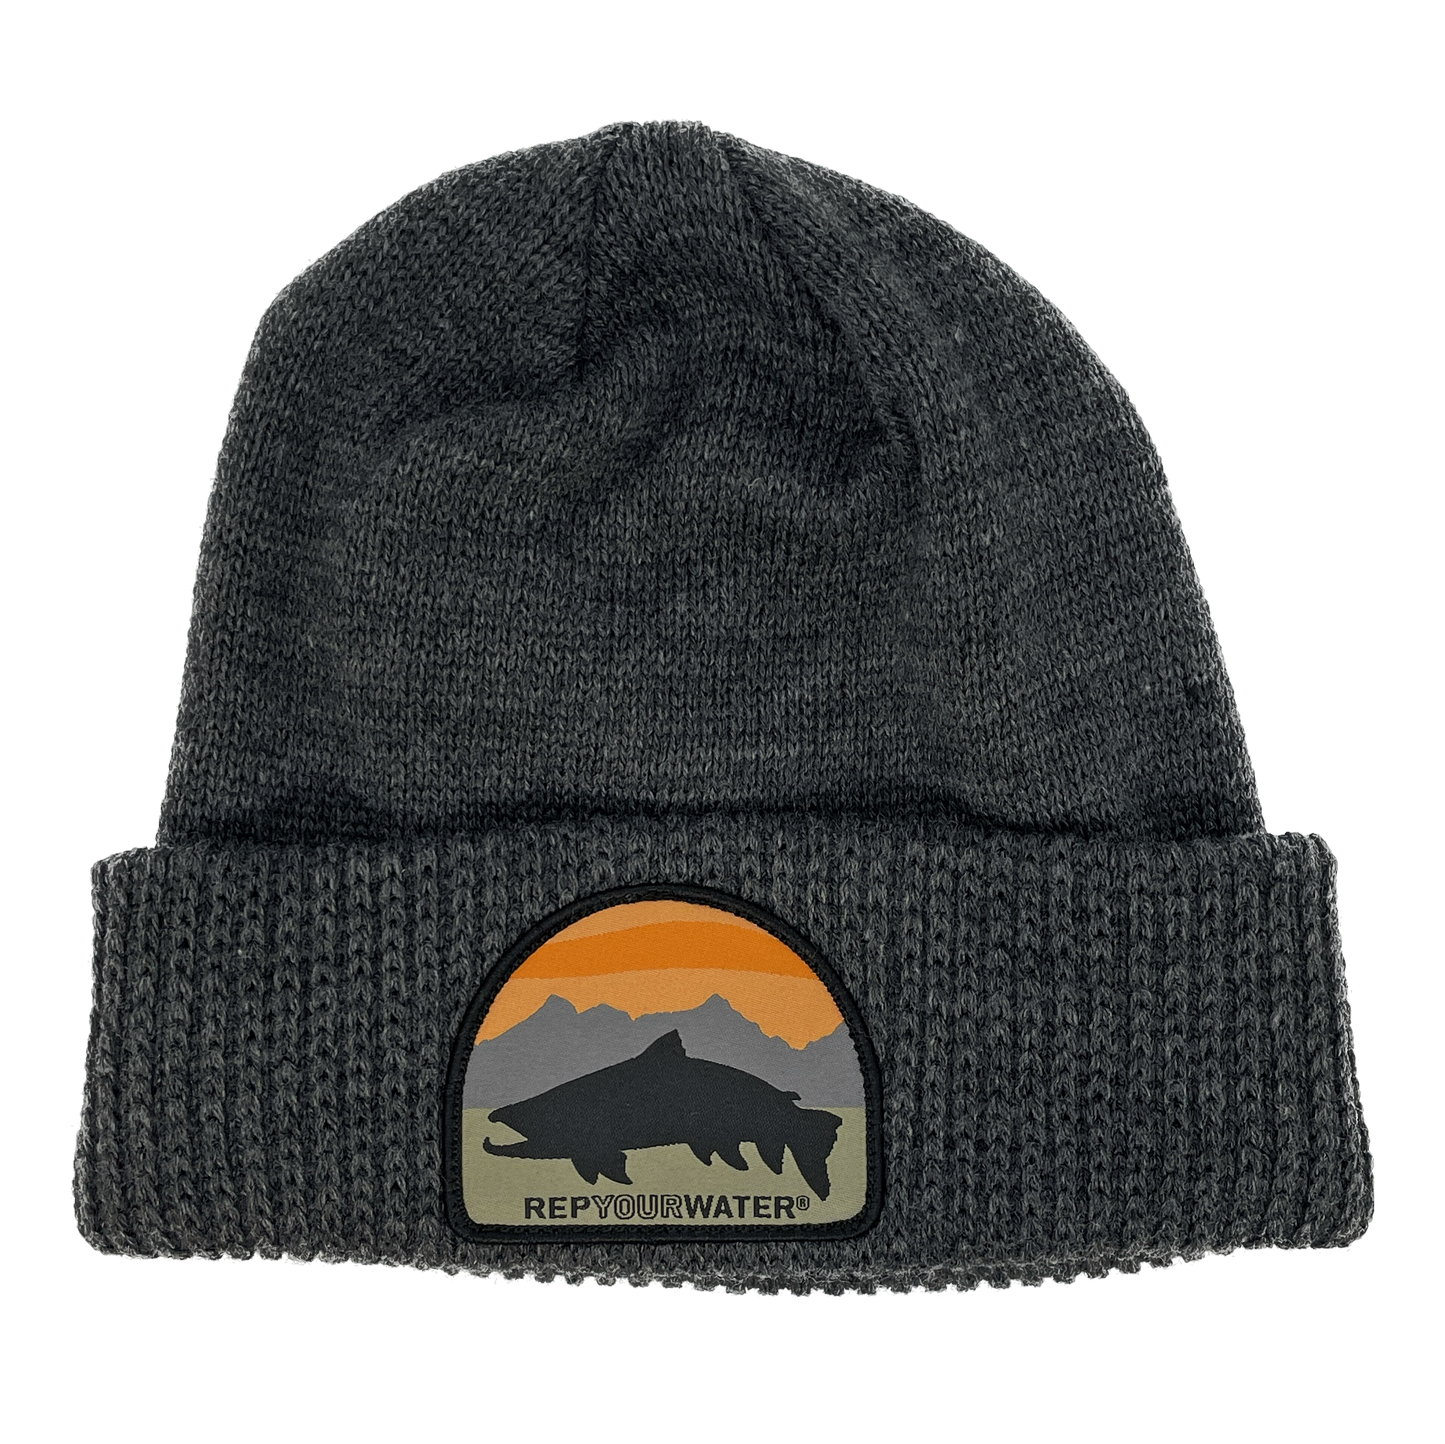 A gray winter hat with a cuff and a patch on the cuff with a mountain range background with a black trout silhouette